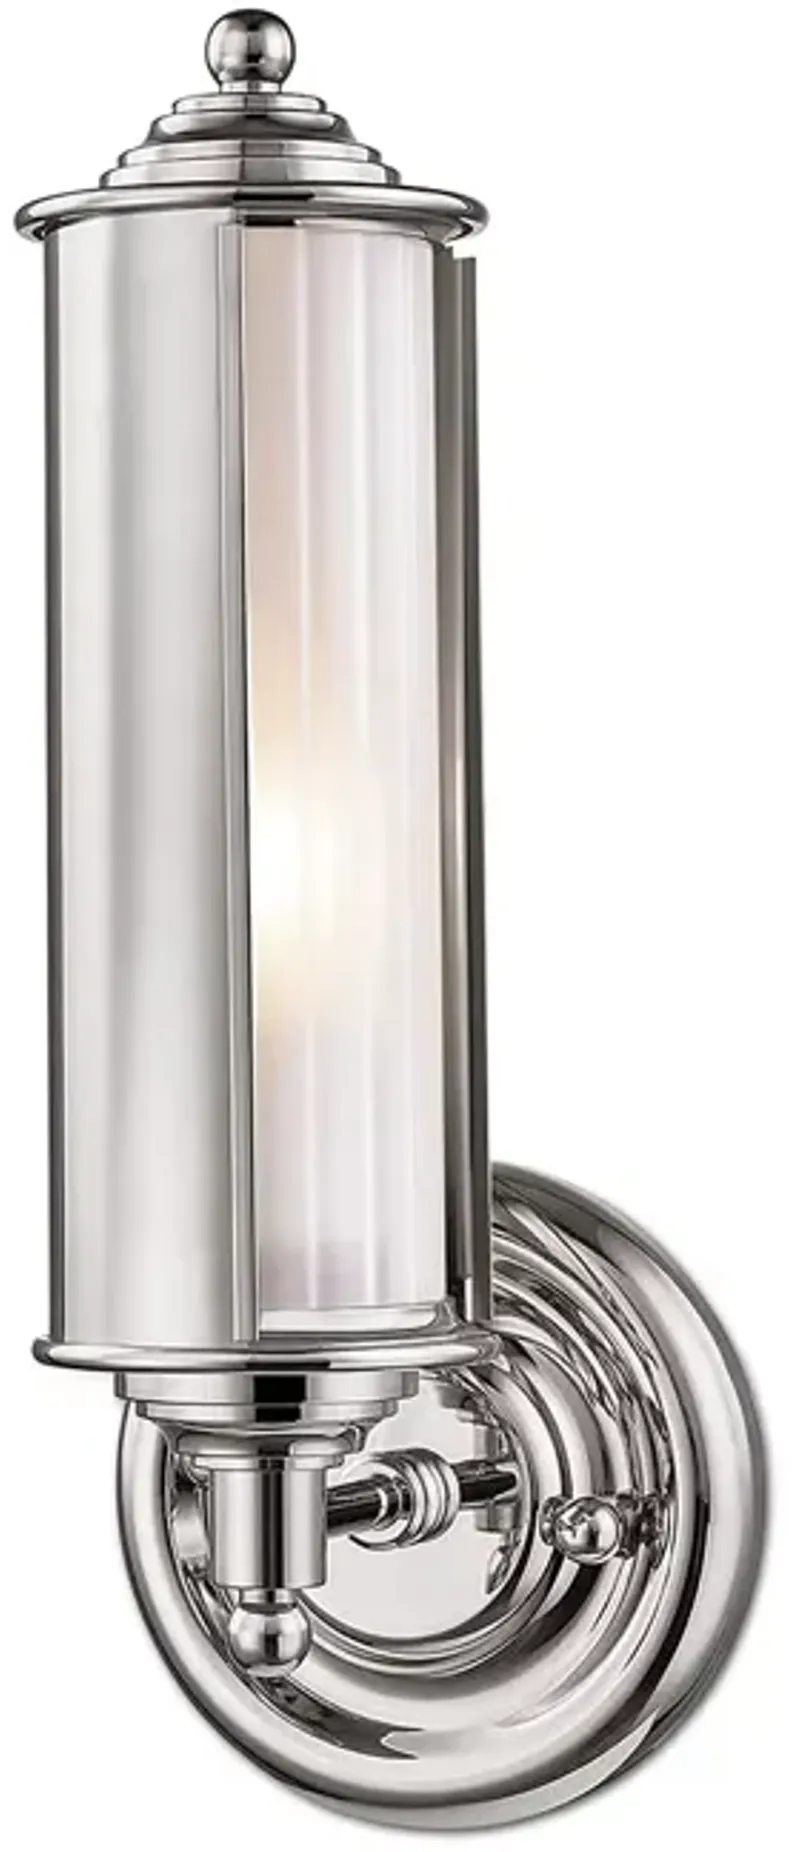 Hudson Valley Lighting Classic No.1 by Mark D. Sikes, One-Light Wall Sconce